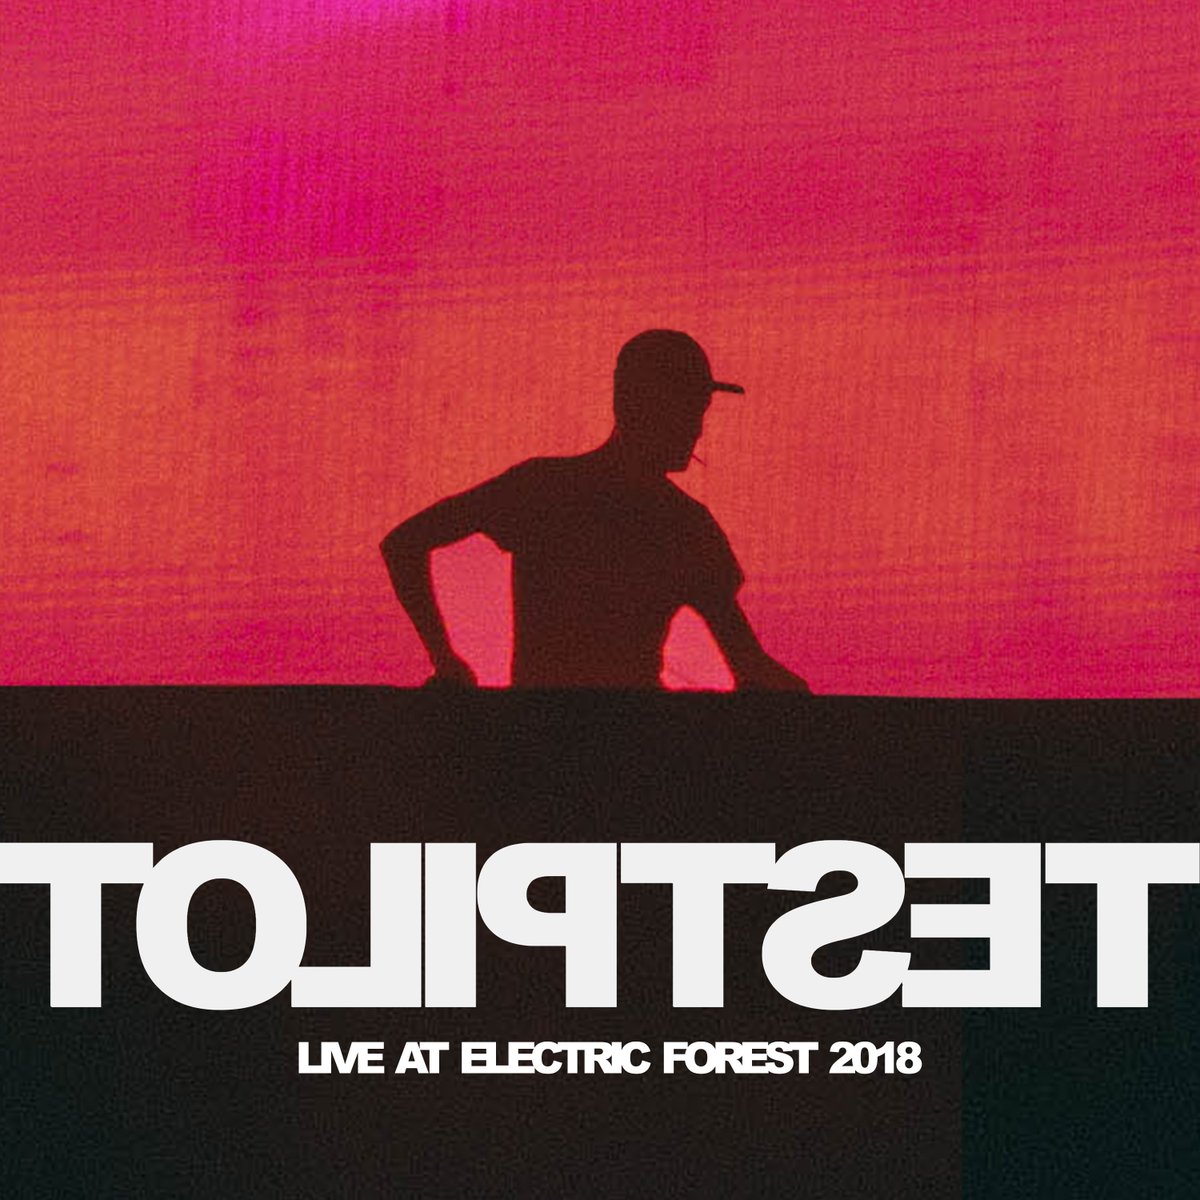 some @toliptset techno from the electric forest! https://t.co/6jRQNMoF7o https://t.co/9olKONE8W1